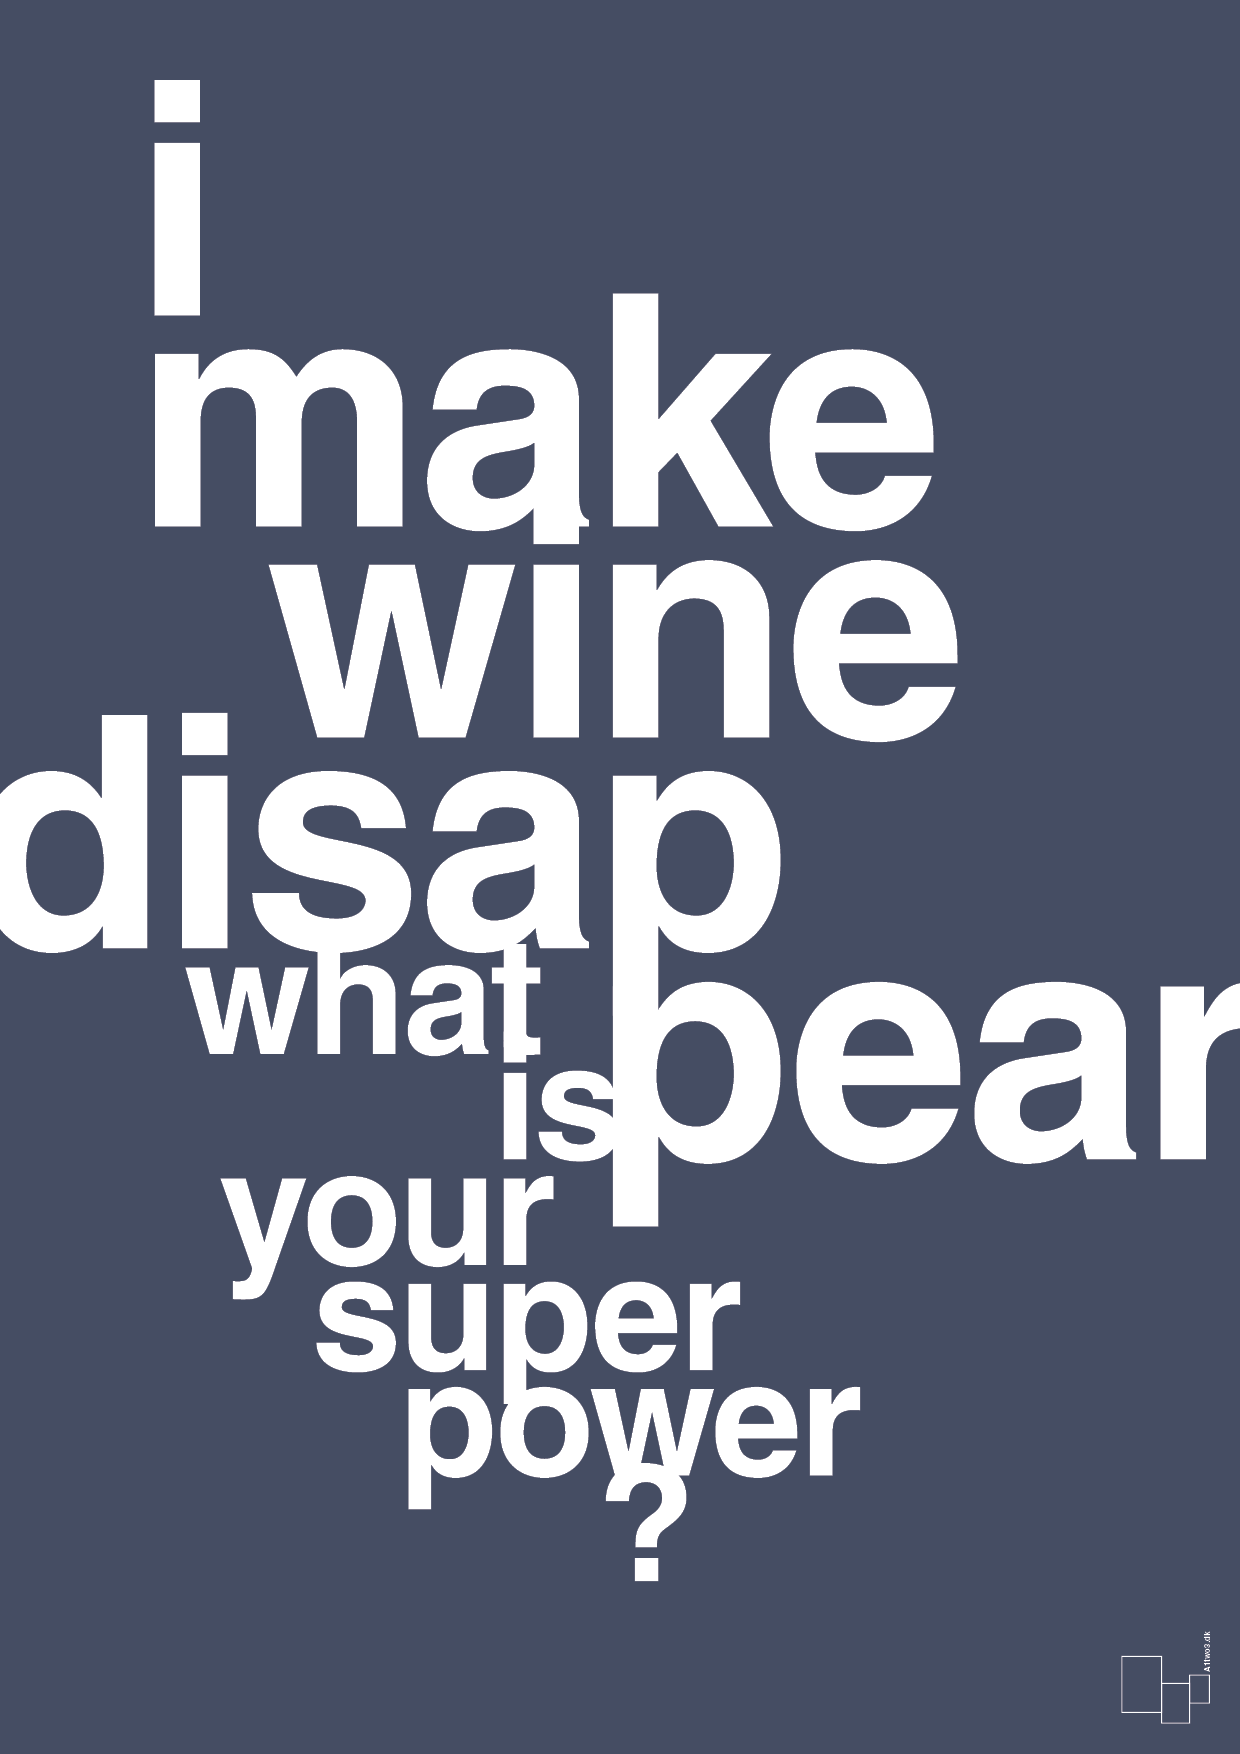 i make wine disappear what is your super power - Plakat med Mad & Drikke i Petrol